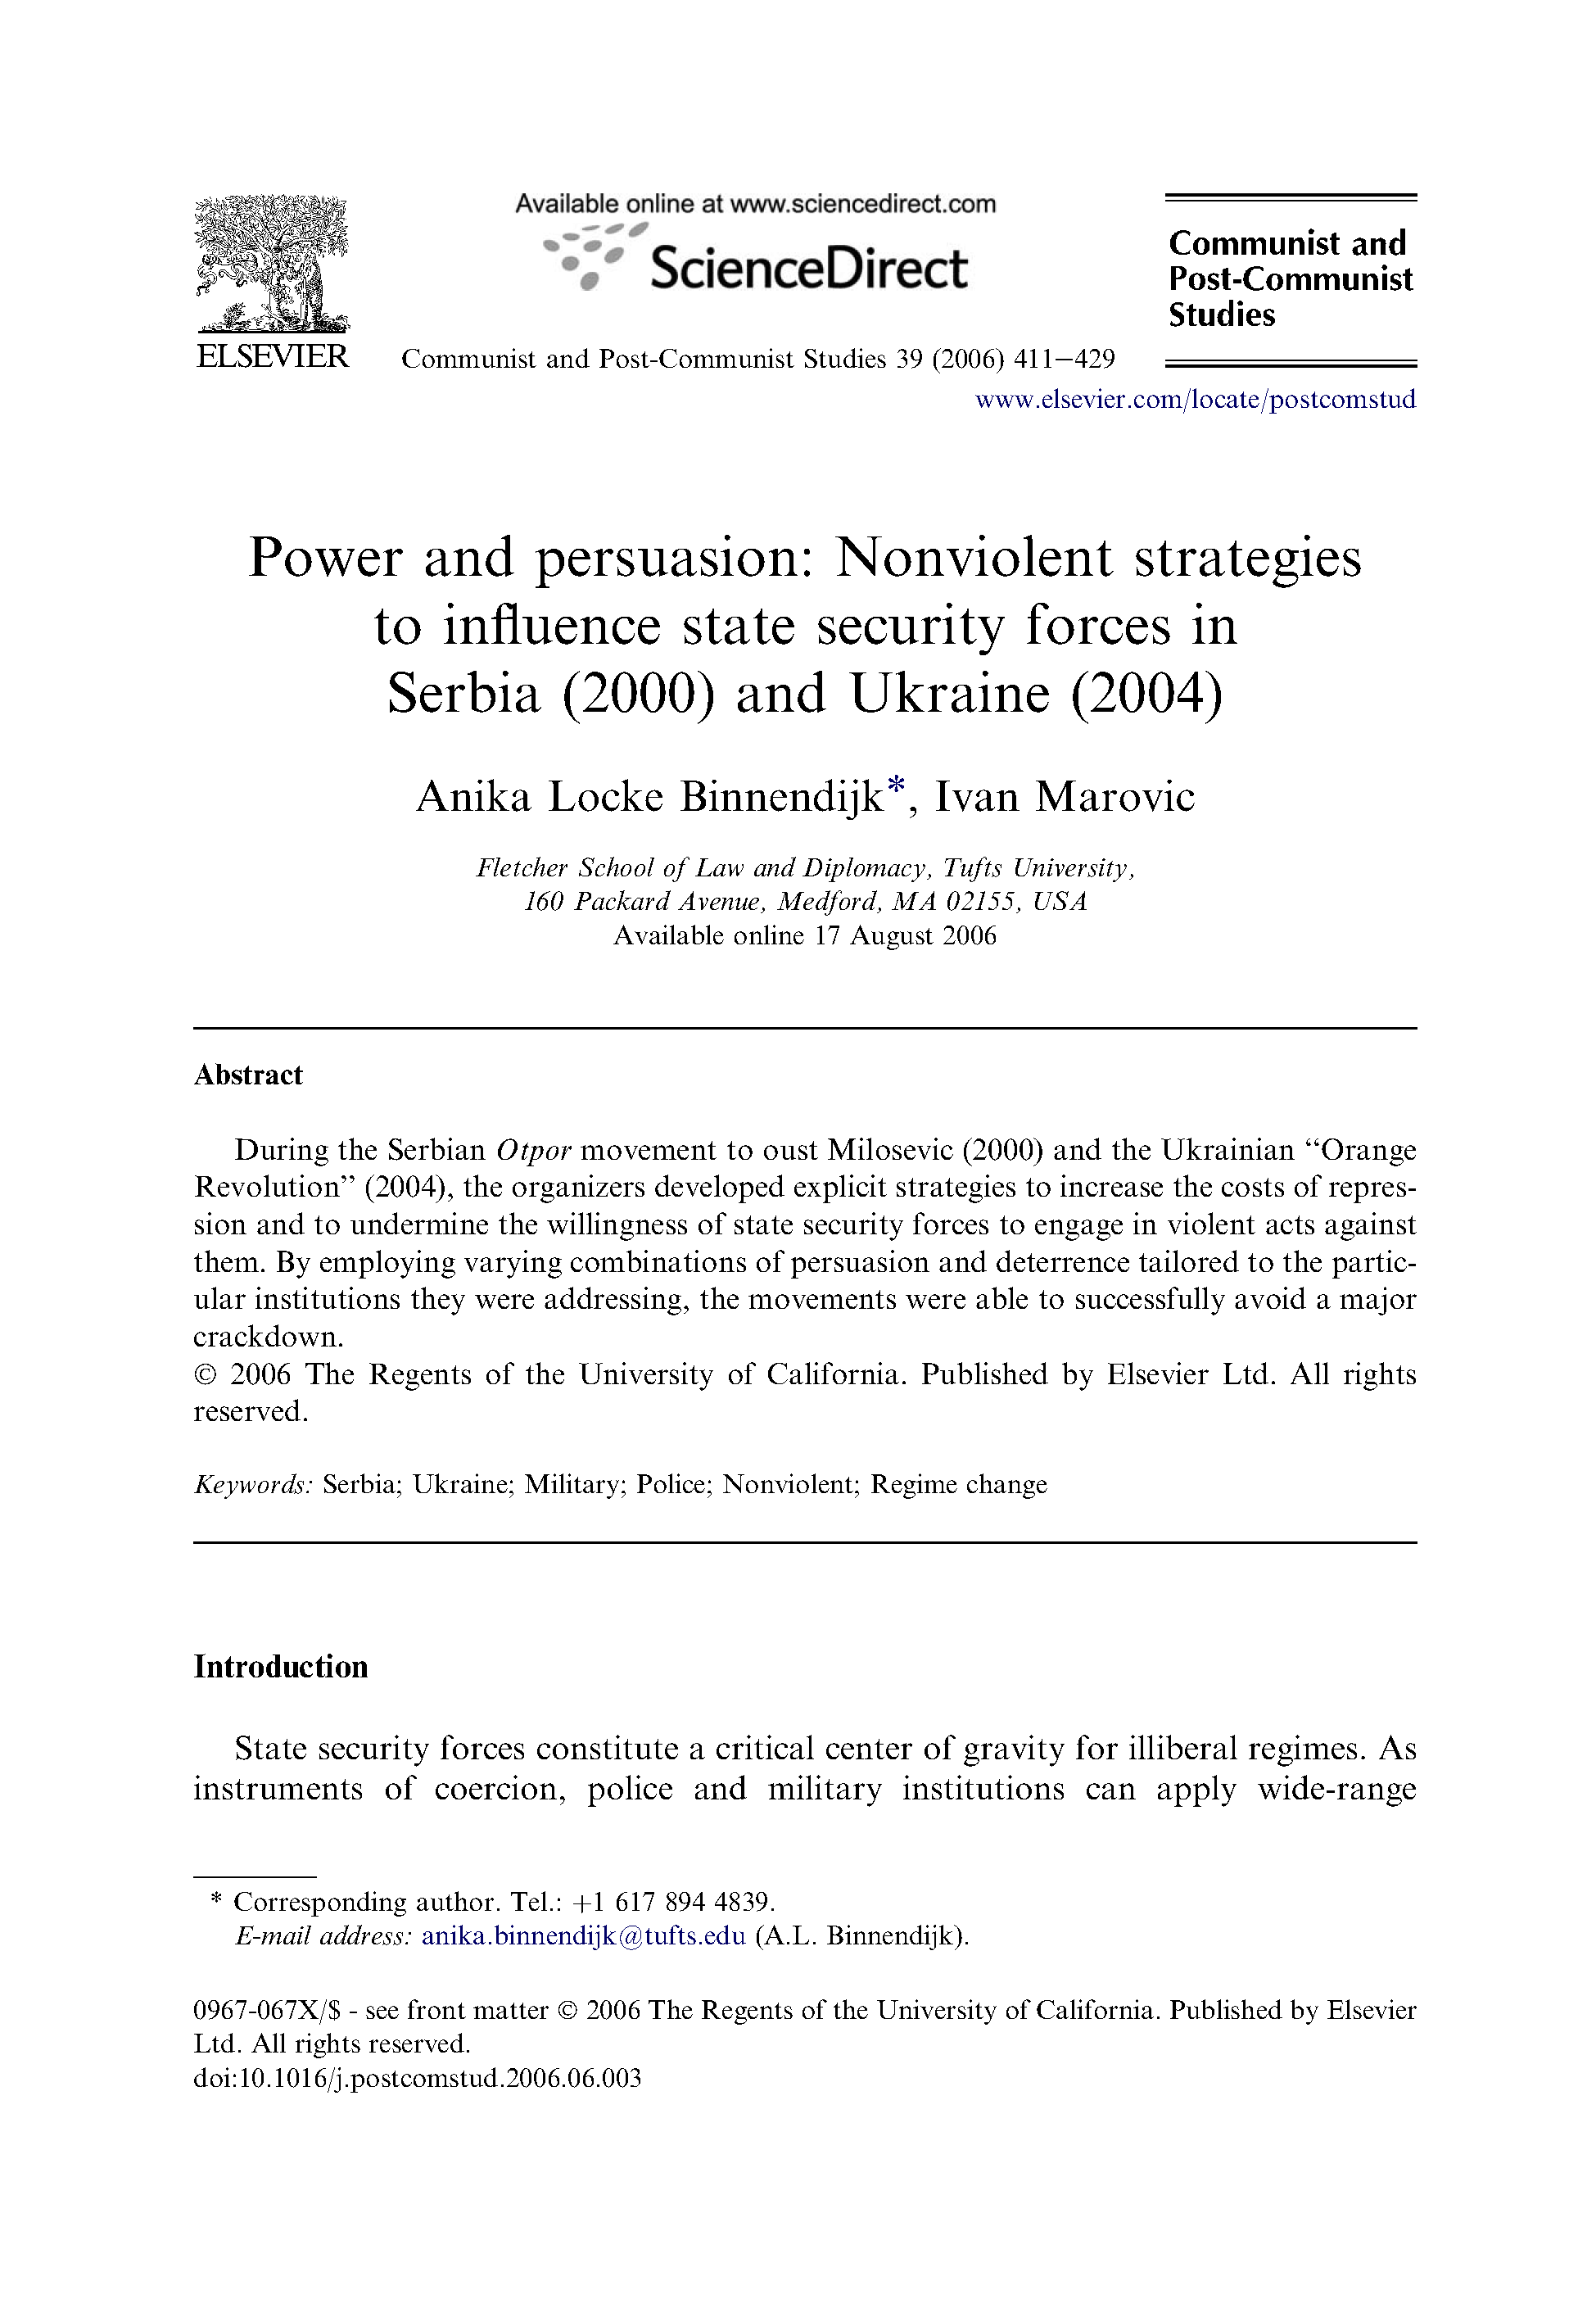 Power and Persuasion: Nonviolent strategies to influence state security forces in Serbia (2000) and Ukraine (2004)